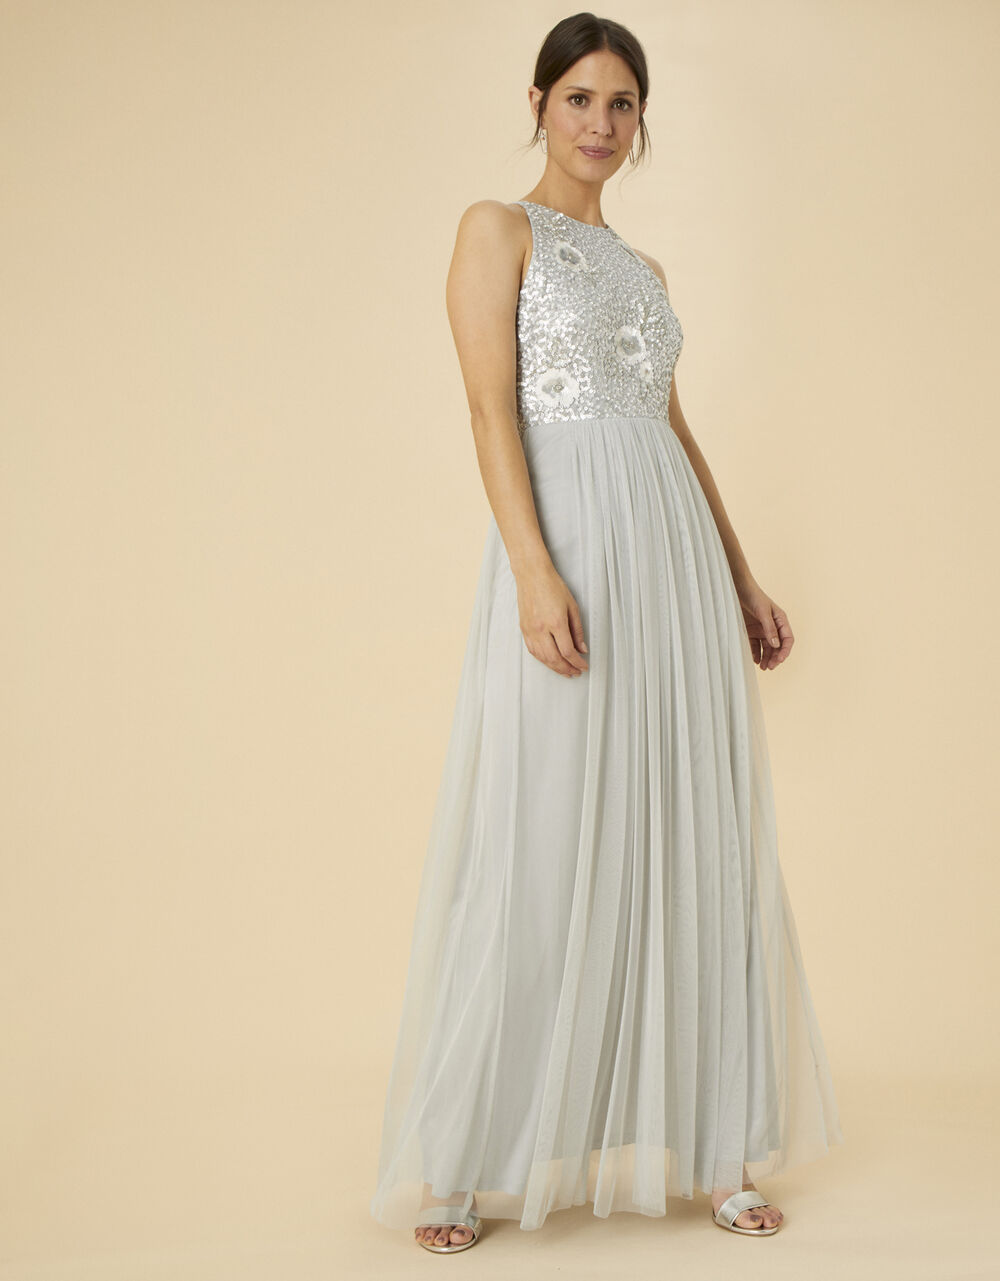 Women Dresses | Adrianna Embellished Maxi Dress in Recycled Polyester Blue - MS60154